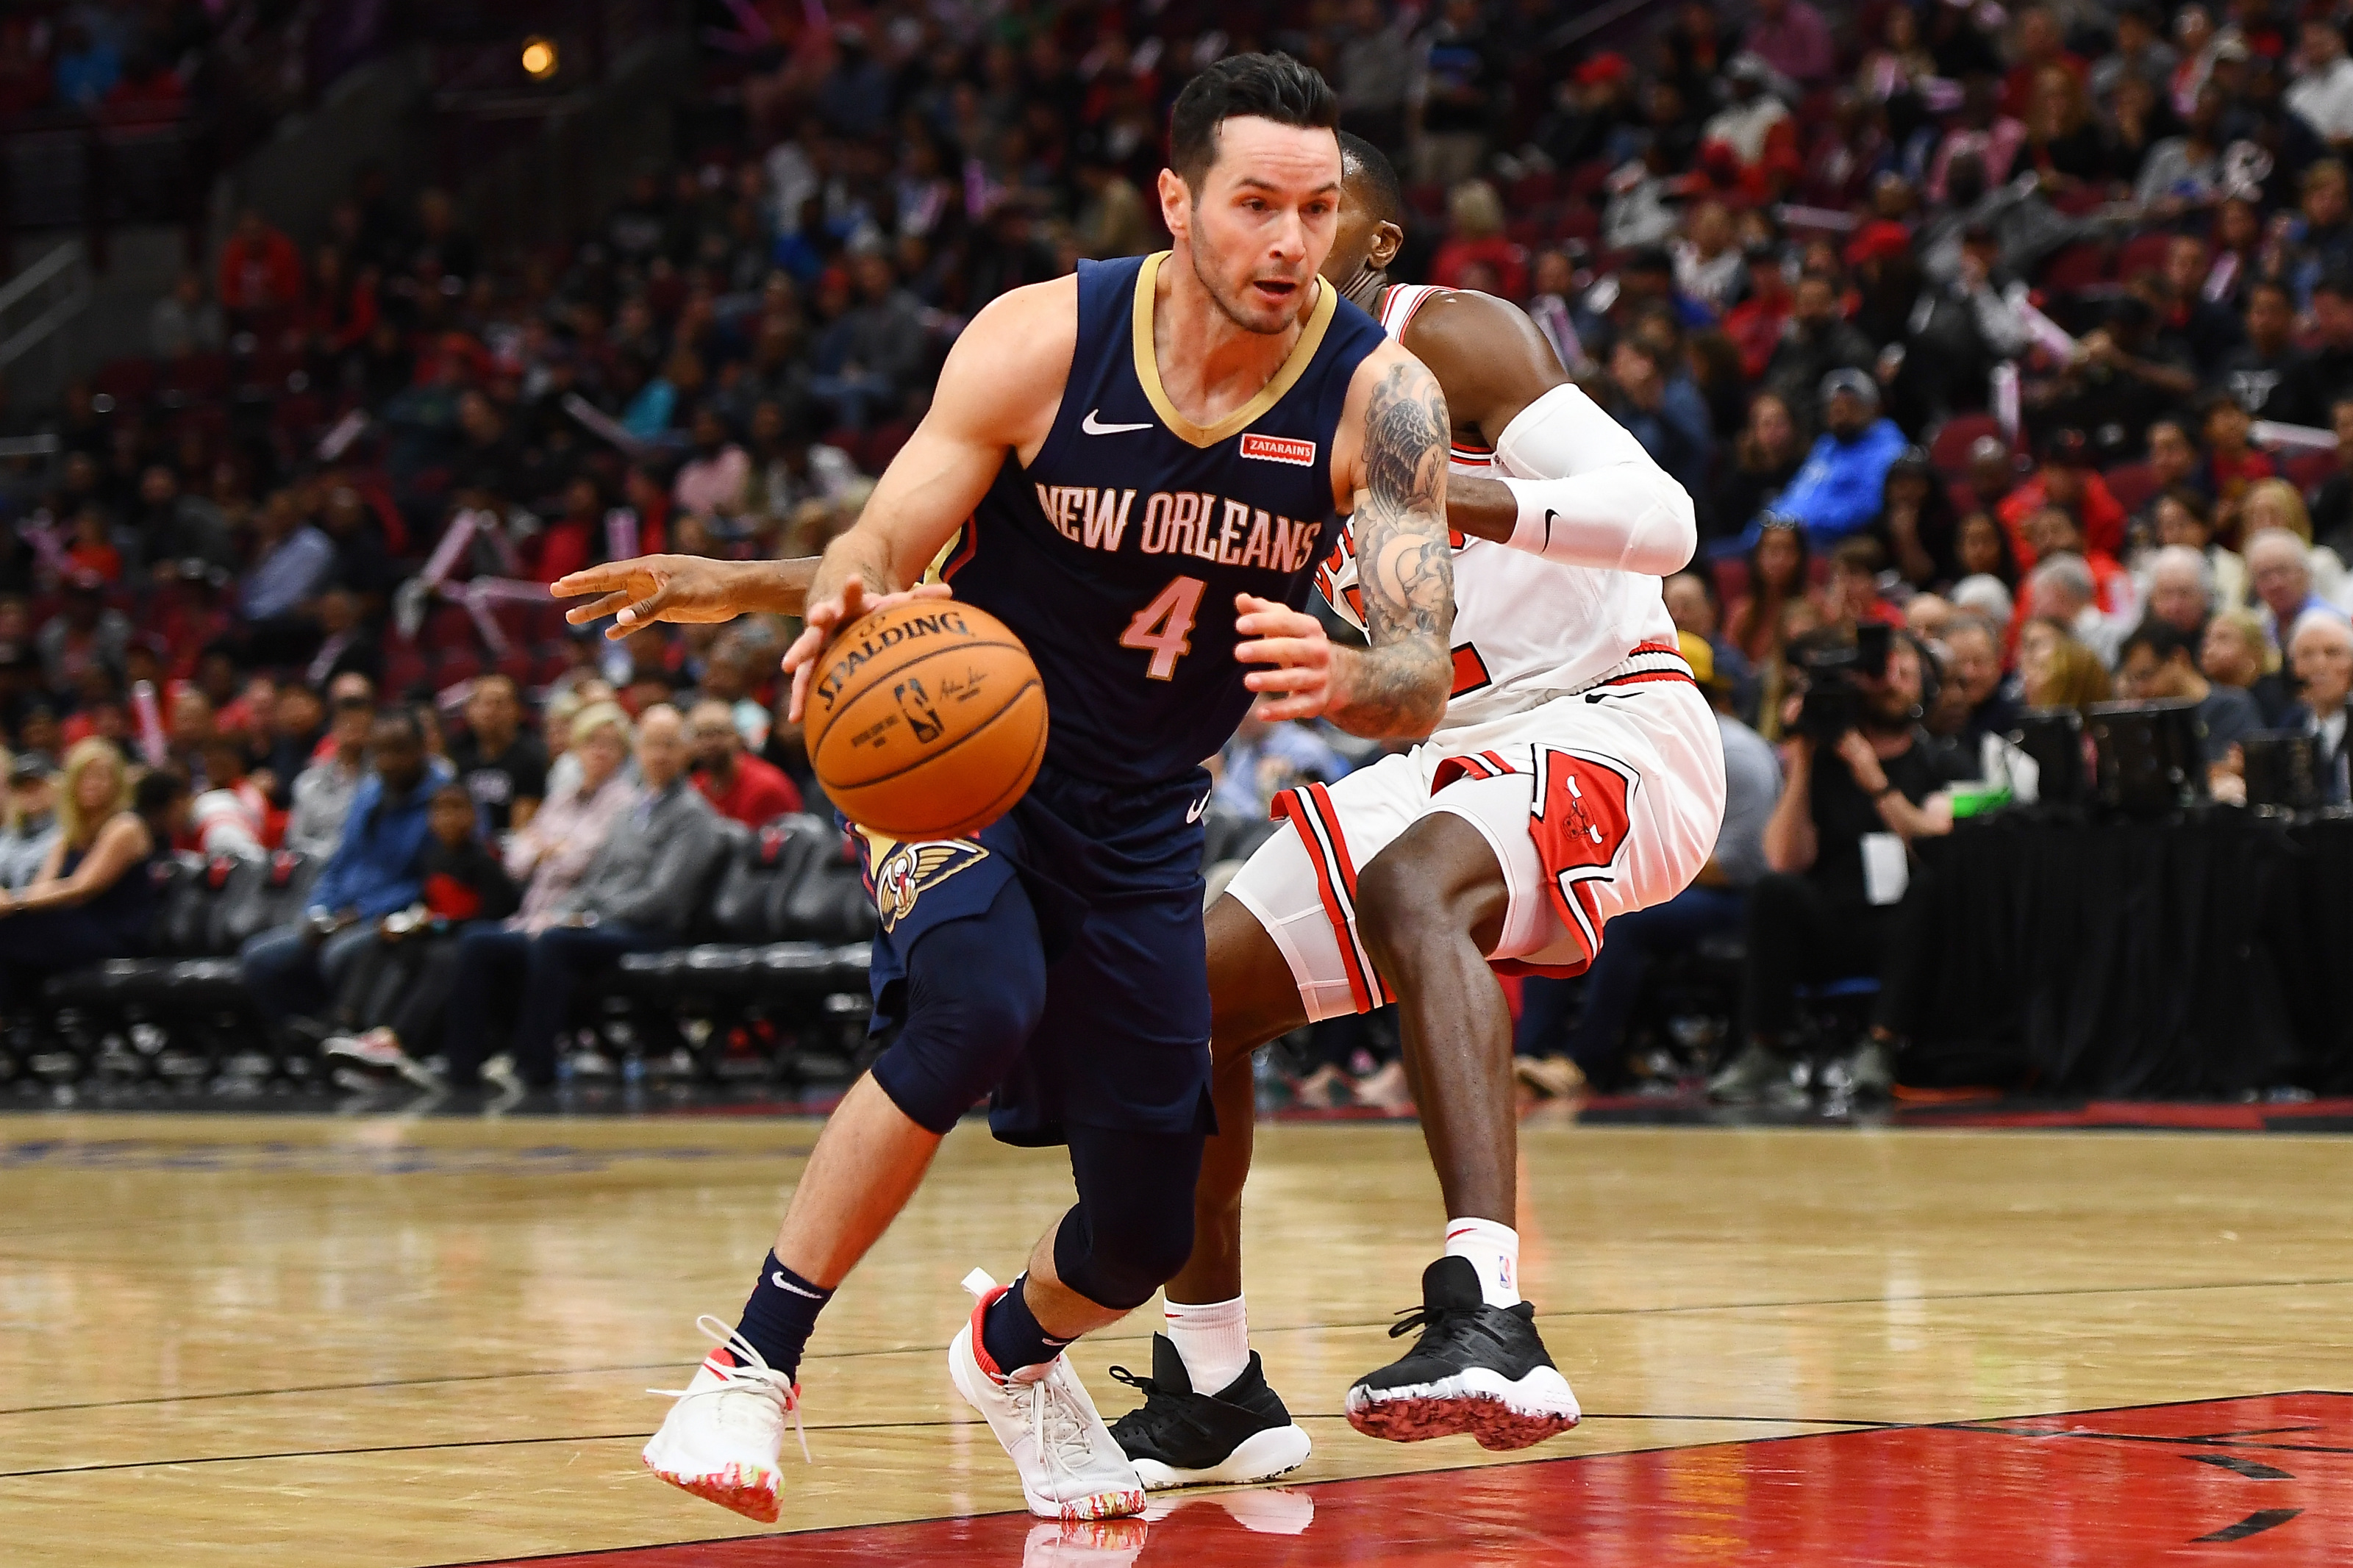 NBA rumors: Former Sixers guard JJ Redick agrees to deal with Pelicans